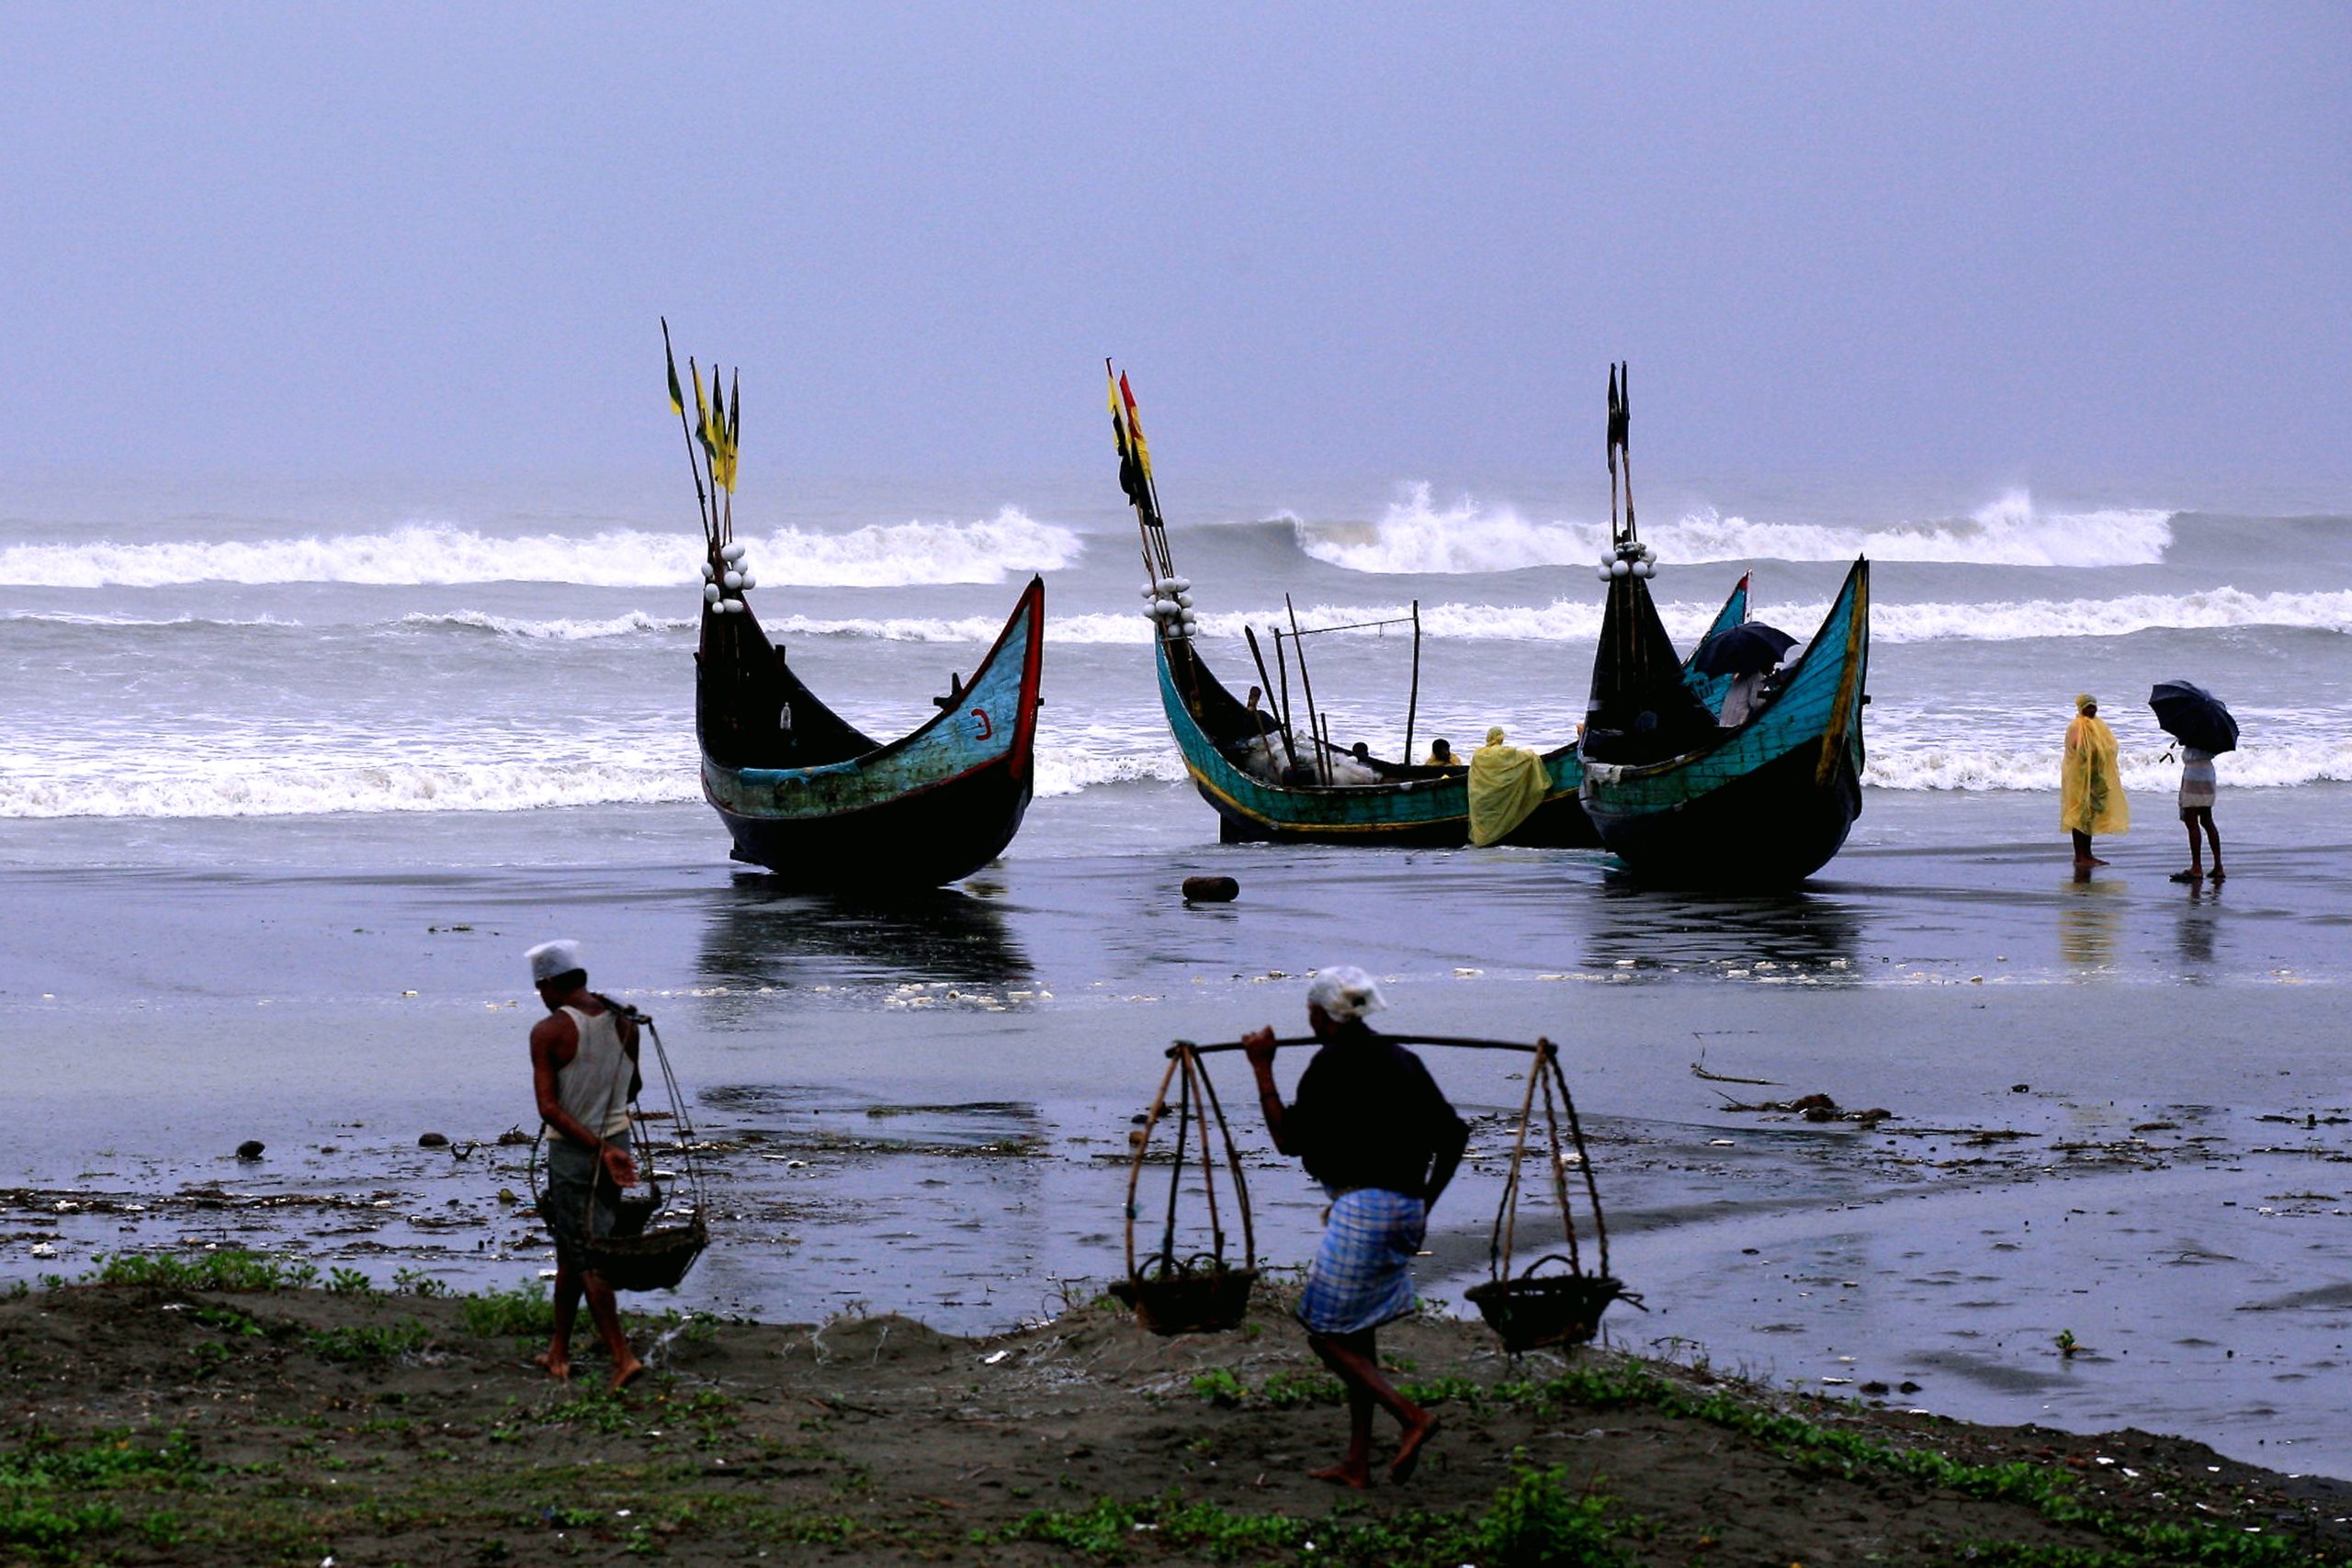 Photograph of traditional fishing boats and people carrying fish on the beach in Bangladesh.